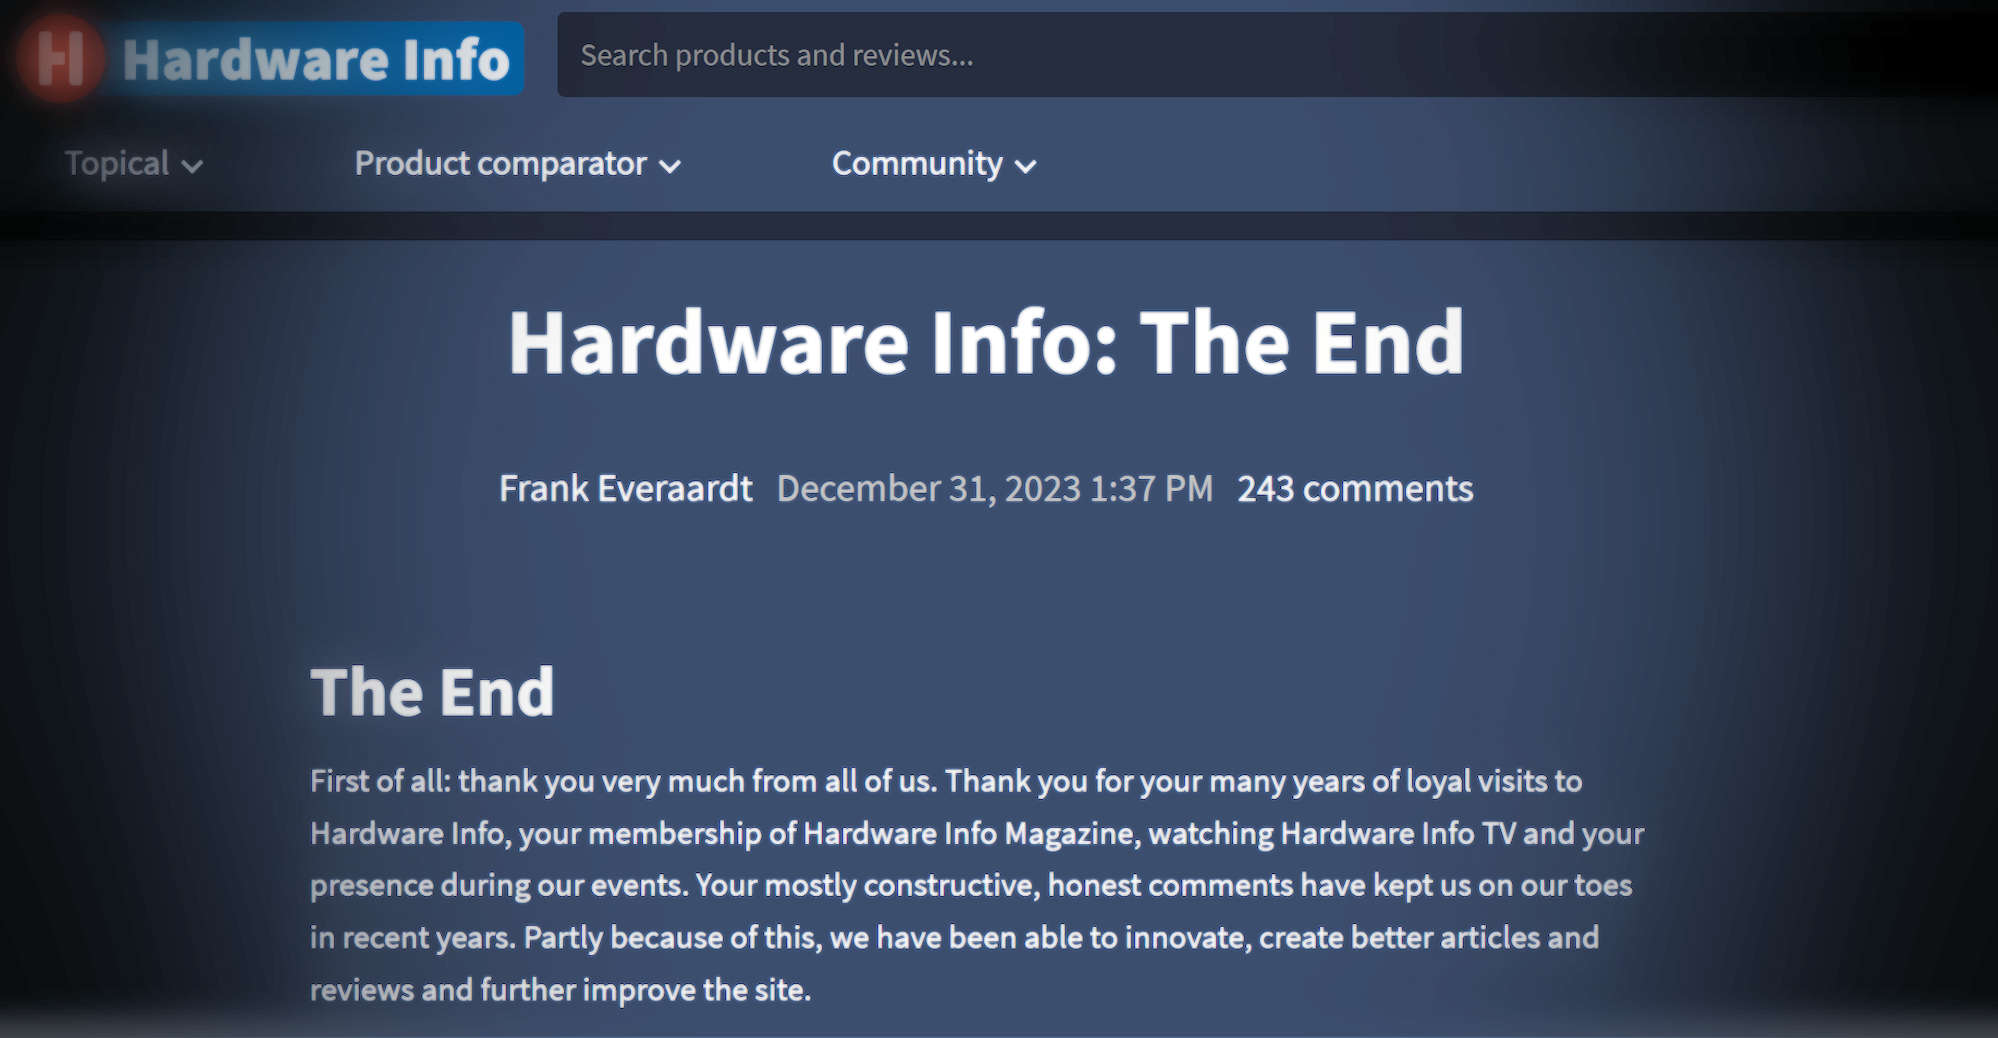 Hardware.info, a leading technology website in the Netherlands, has been shut down